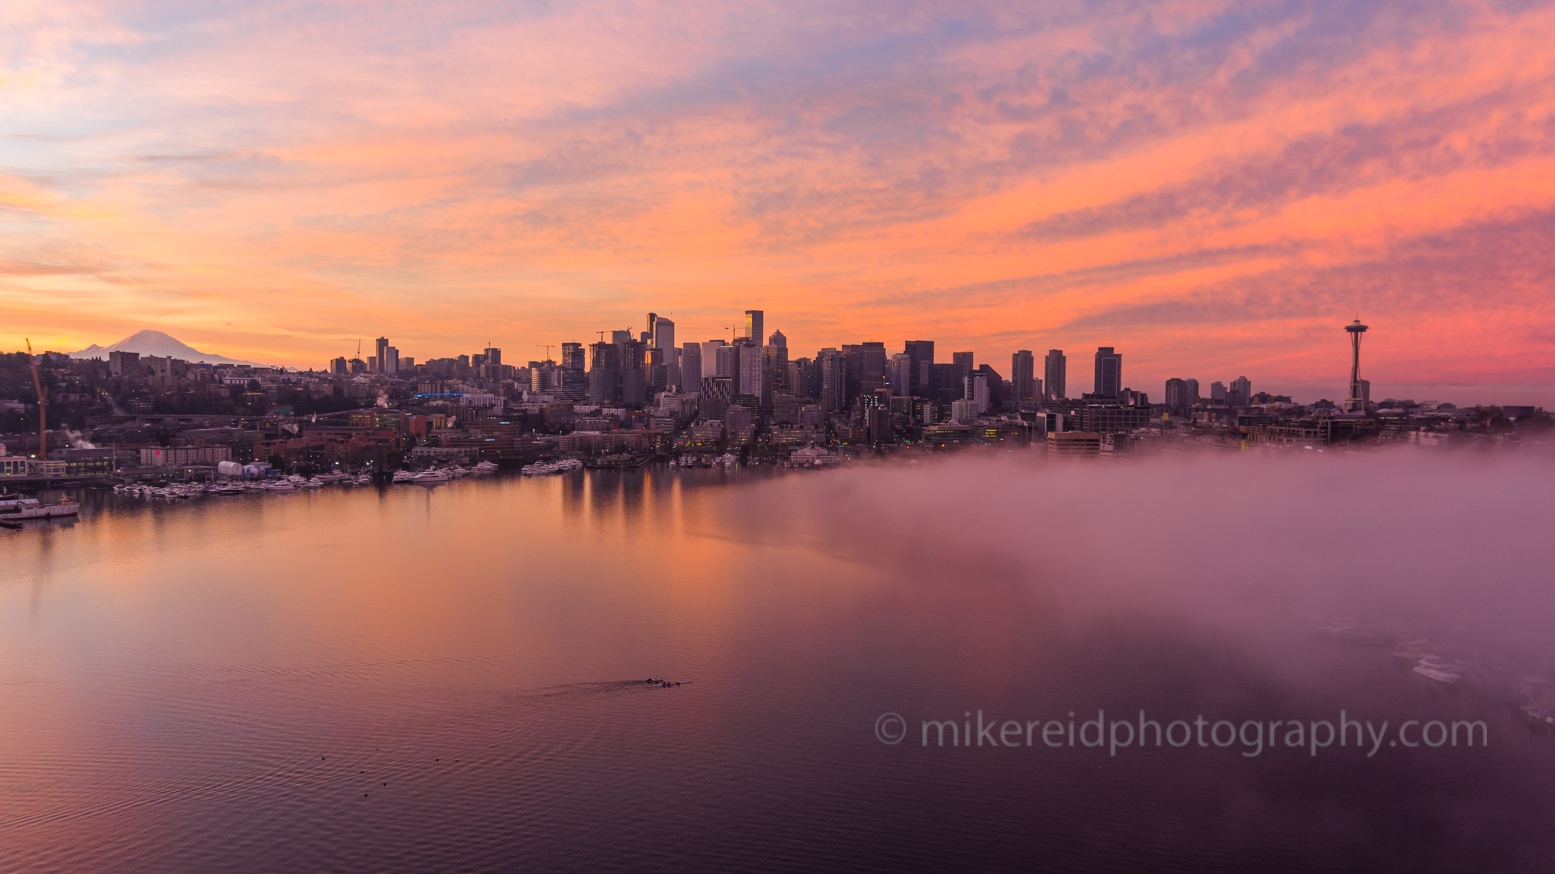 Aerial Seattle Lake Union Under a Cloud.jpg Aerial views over Seattle and surroundings in these unique video and photographic perspectives. To arrange a custom Seattle aerial photography tour, please contacct me. #seattle